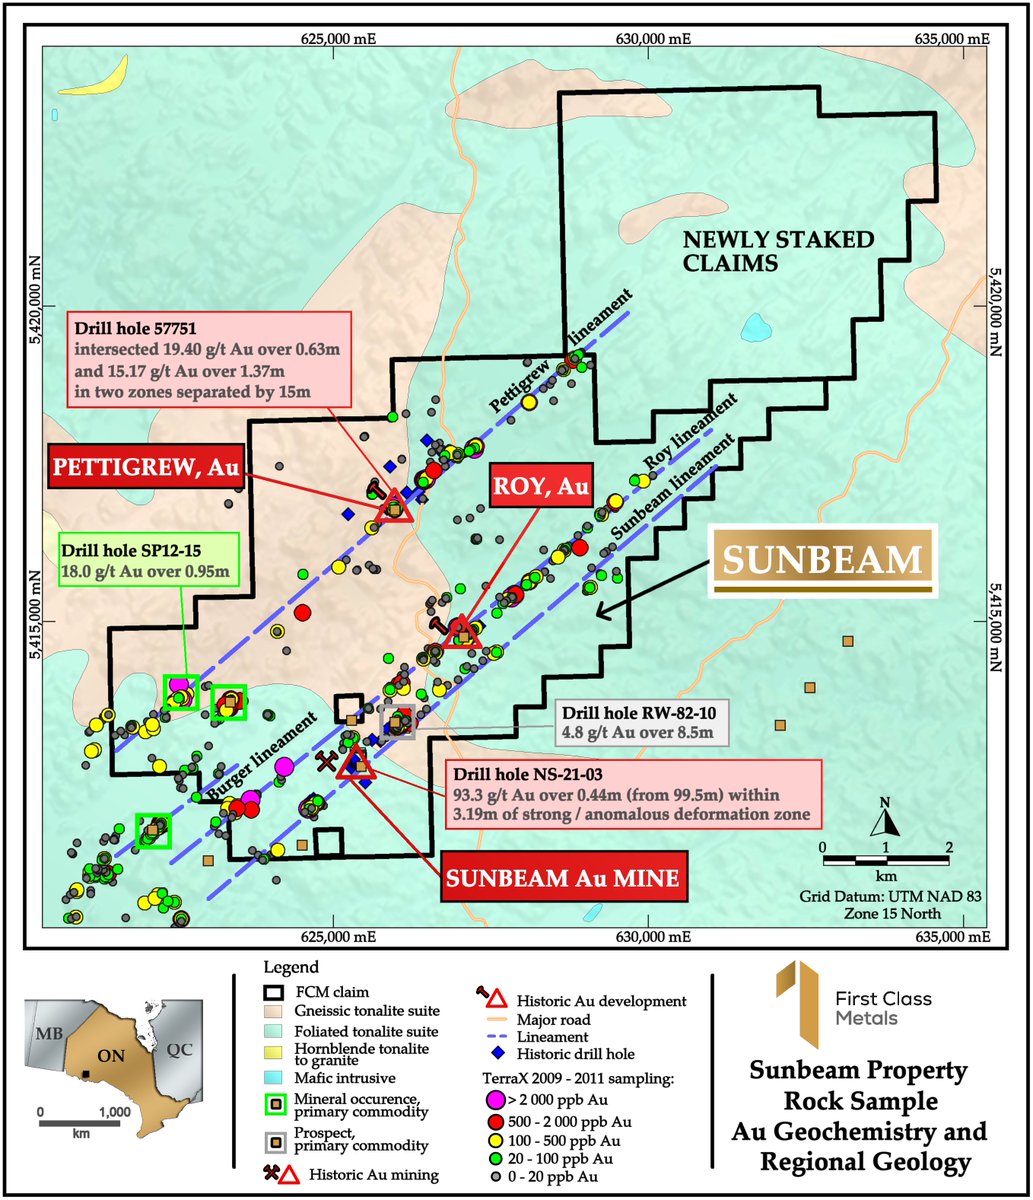 𝐅𝐢𝐫𝐬𝐭 𝐂𝐥𝐚𝐬𝐬 𝐌𝐞𝐭𝐚𝐥𝐬 𝐒𝐮𝐧𝐛𝐞𝐚𝐦 𝐆𝐨𝐥𝐝 𝐏𝐫𝐨𝐣𝐞𝐜𝐭 ⛏️District Scale gold project in Ontario. ⛏️Historic producing 'Sunbeam Mine' and two other workings at Roy & Pettigrew. ⛏️Three mineralised trends of 10km each long. ⛏️Large extension to the NE on